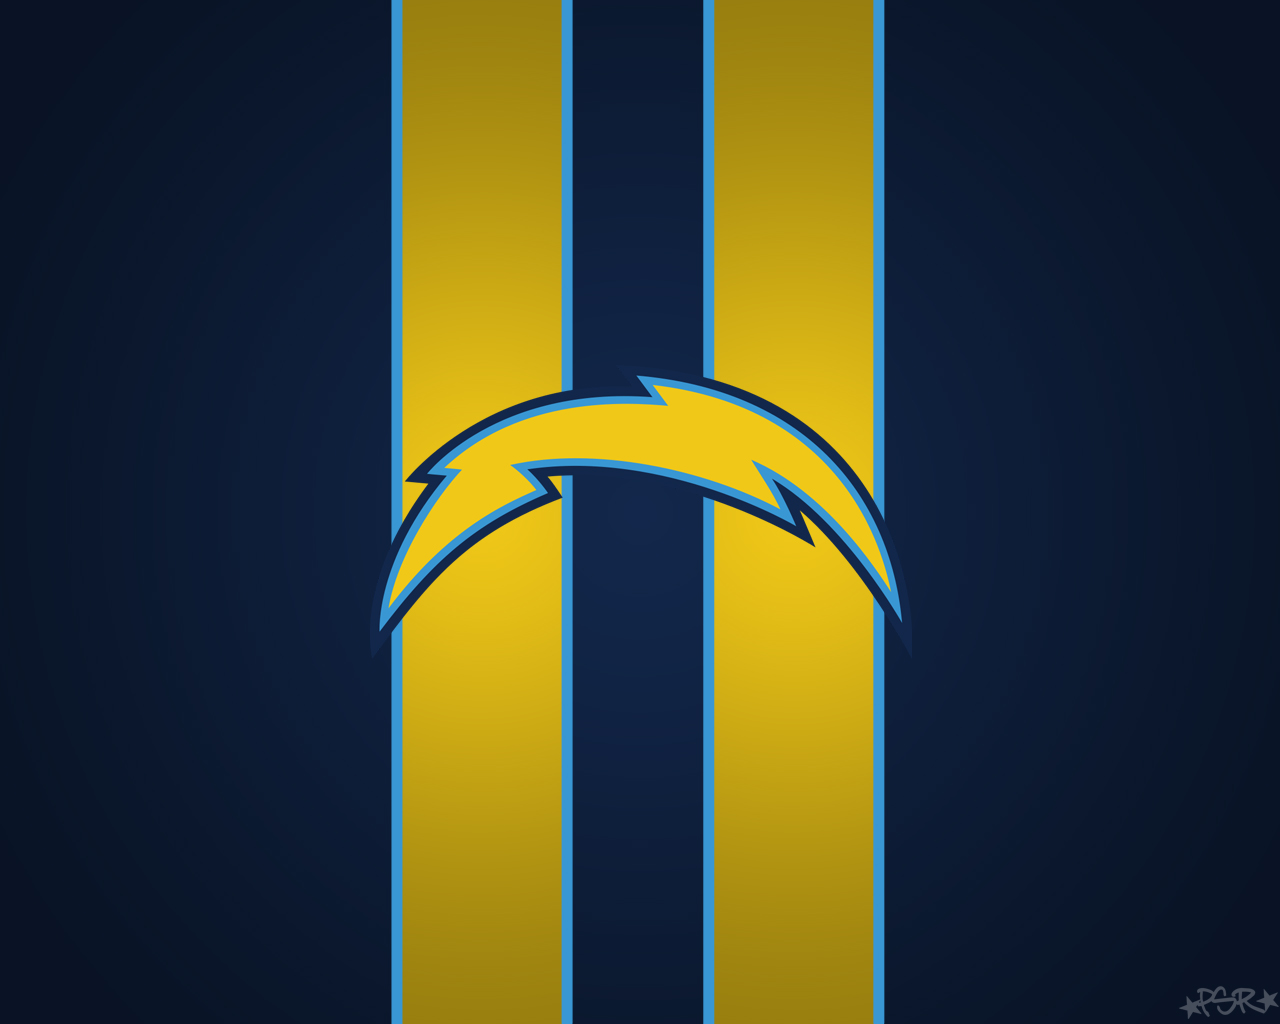 Chargers wallpaper 1280x1024 2802